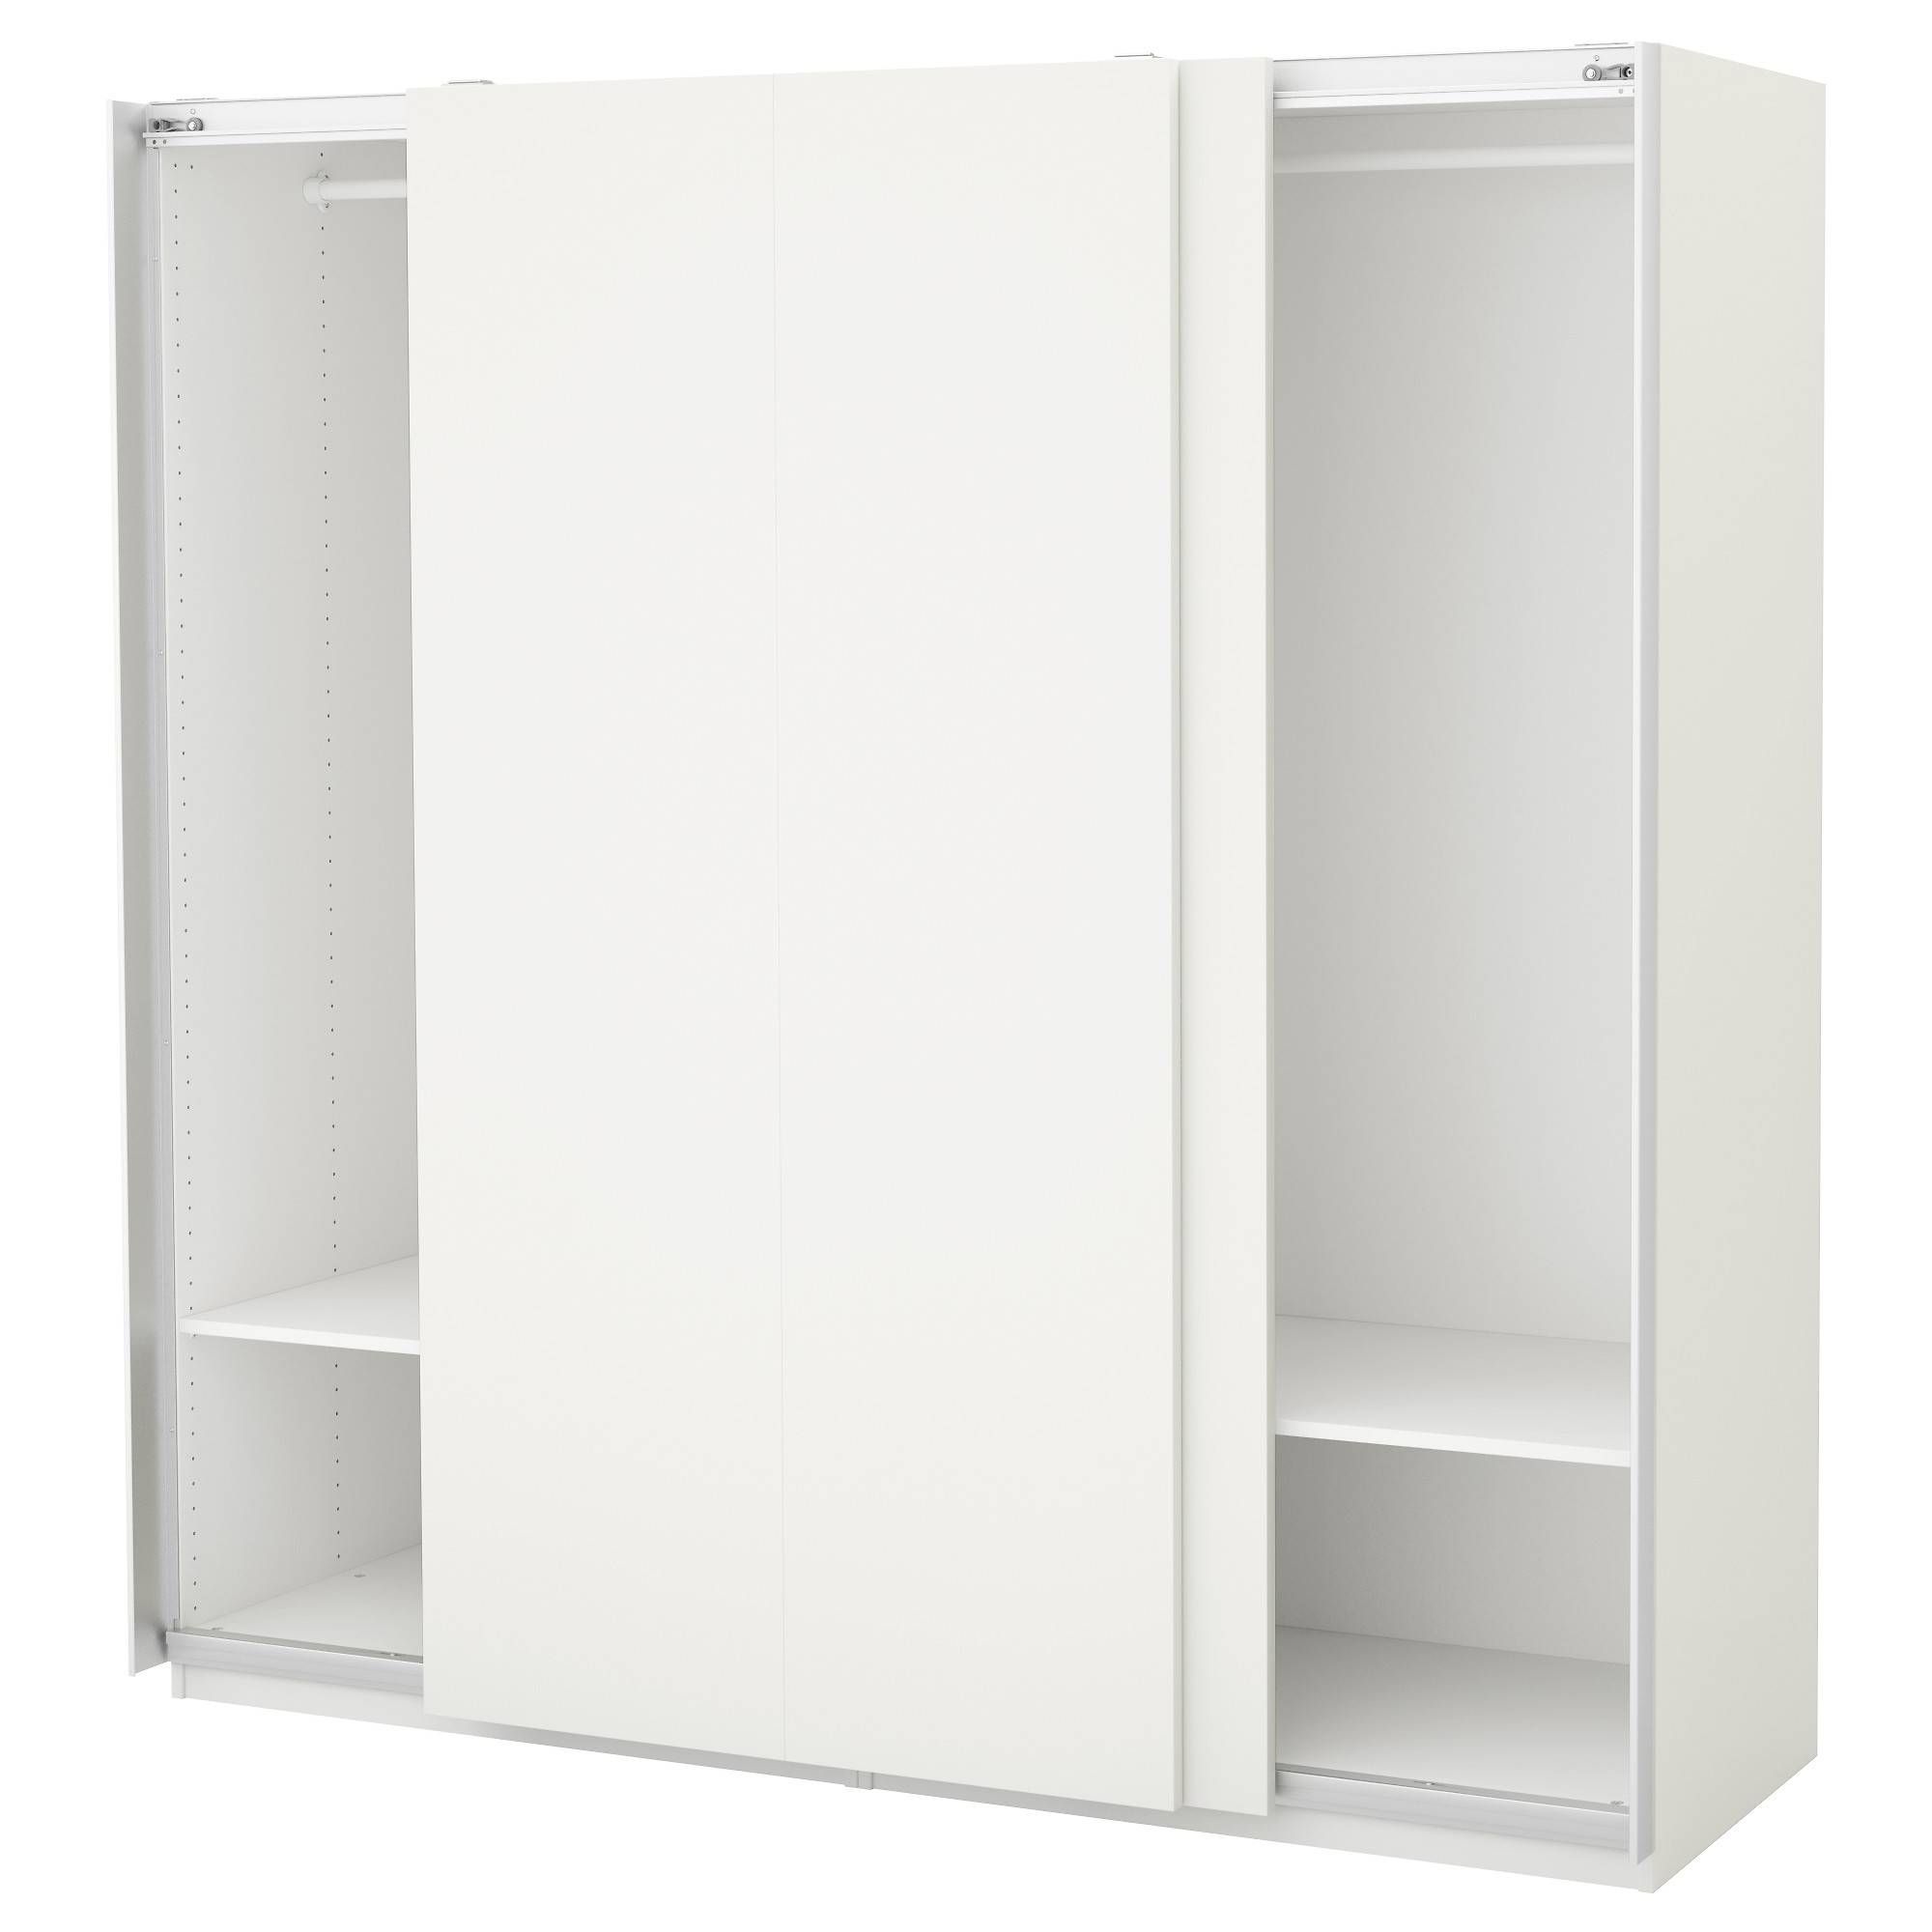 Wardrobes | Ikea In White Double Wardrobes (View 13 of 15)